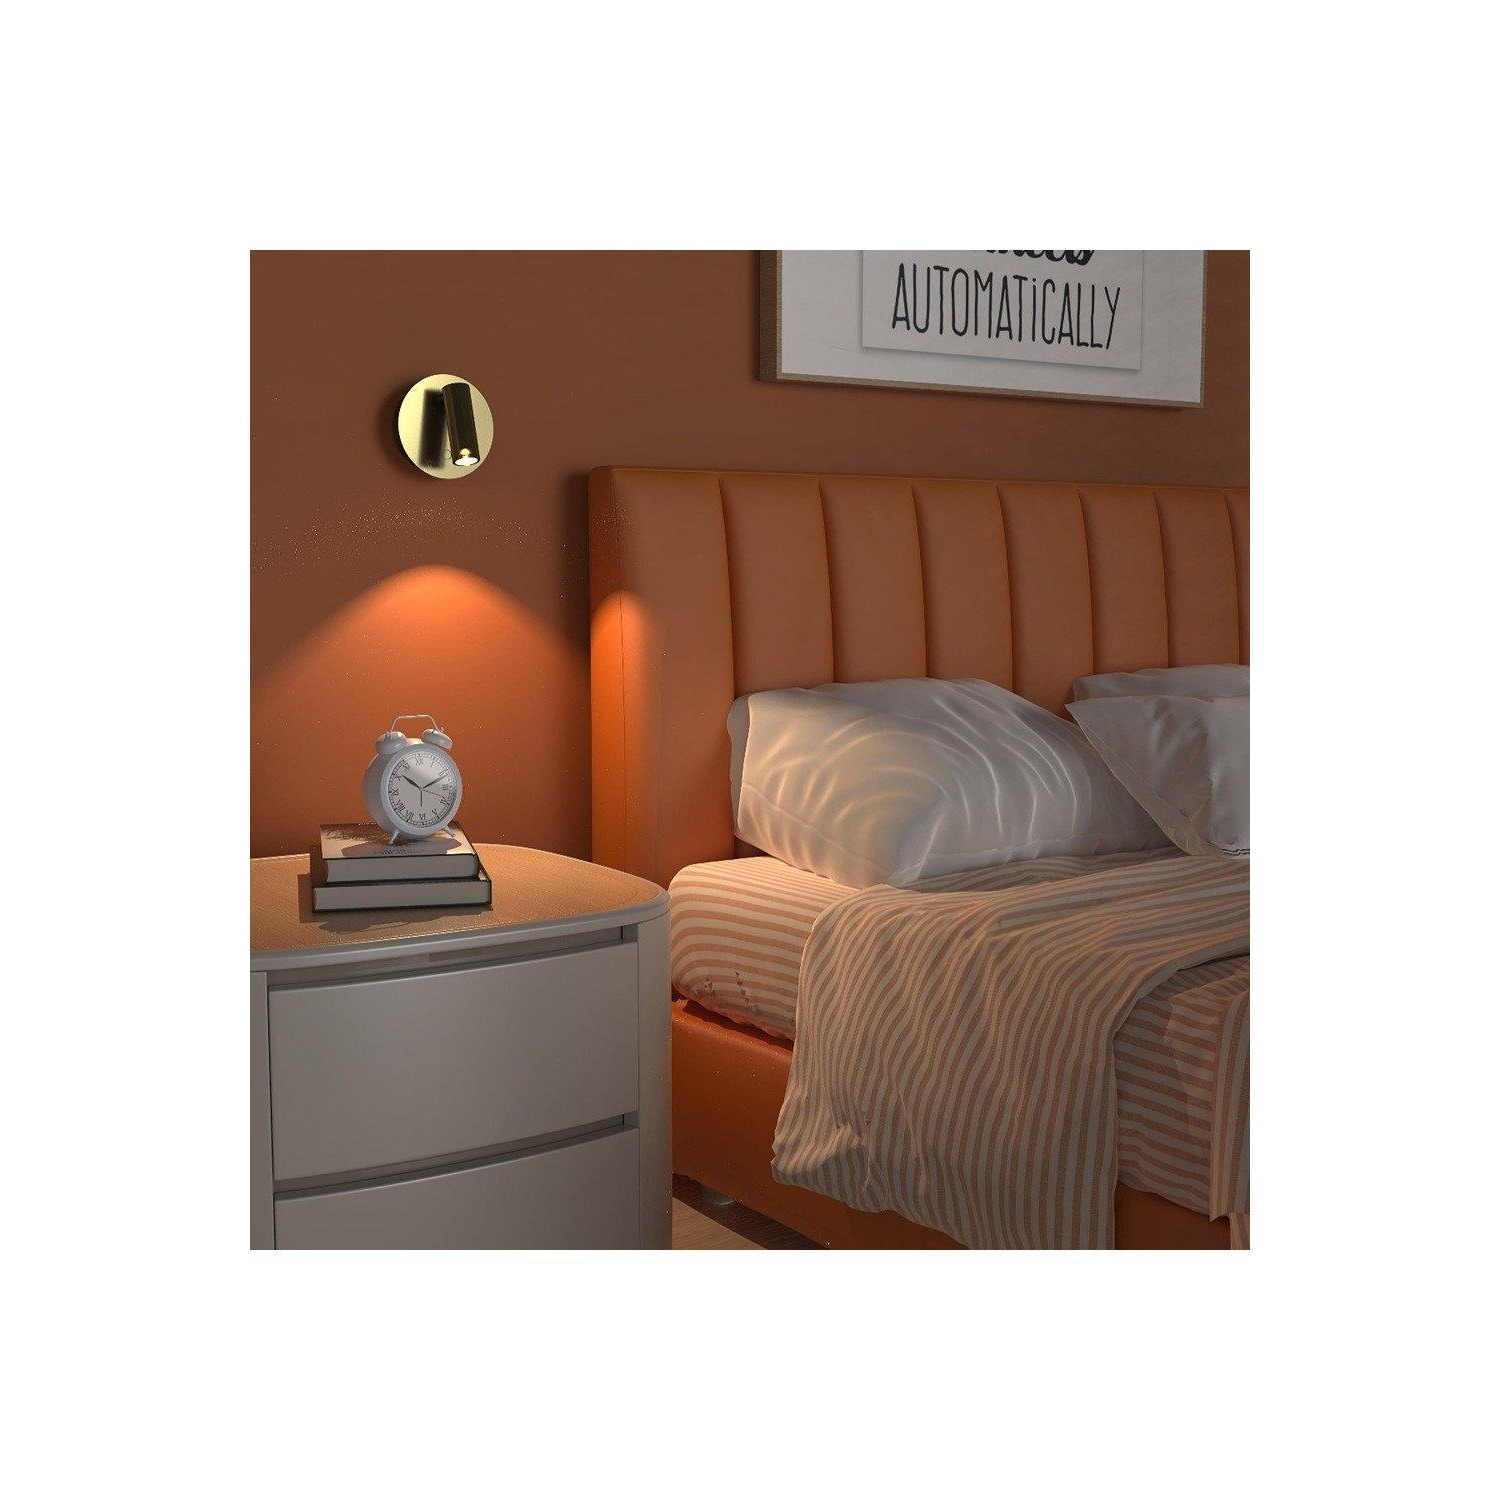 CGC Lighting 'Scarlet' Satin Gold Adjustable Head LED Rechargeable Magnetic USB Reading Bedside Wall Light - image 1